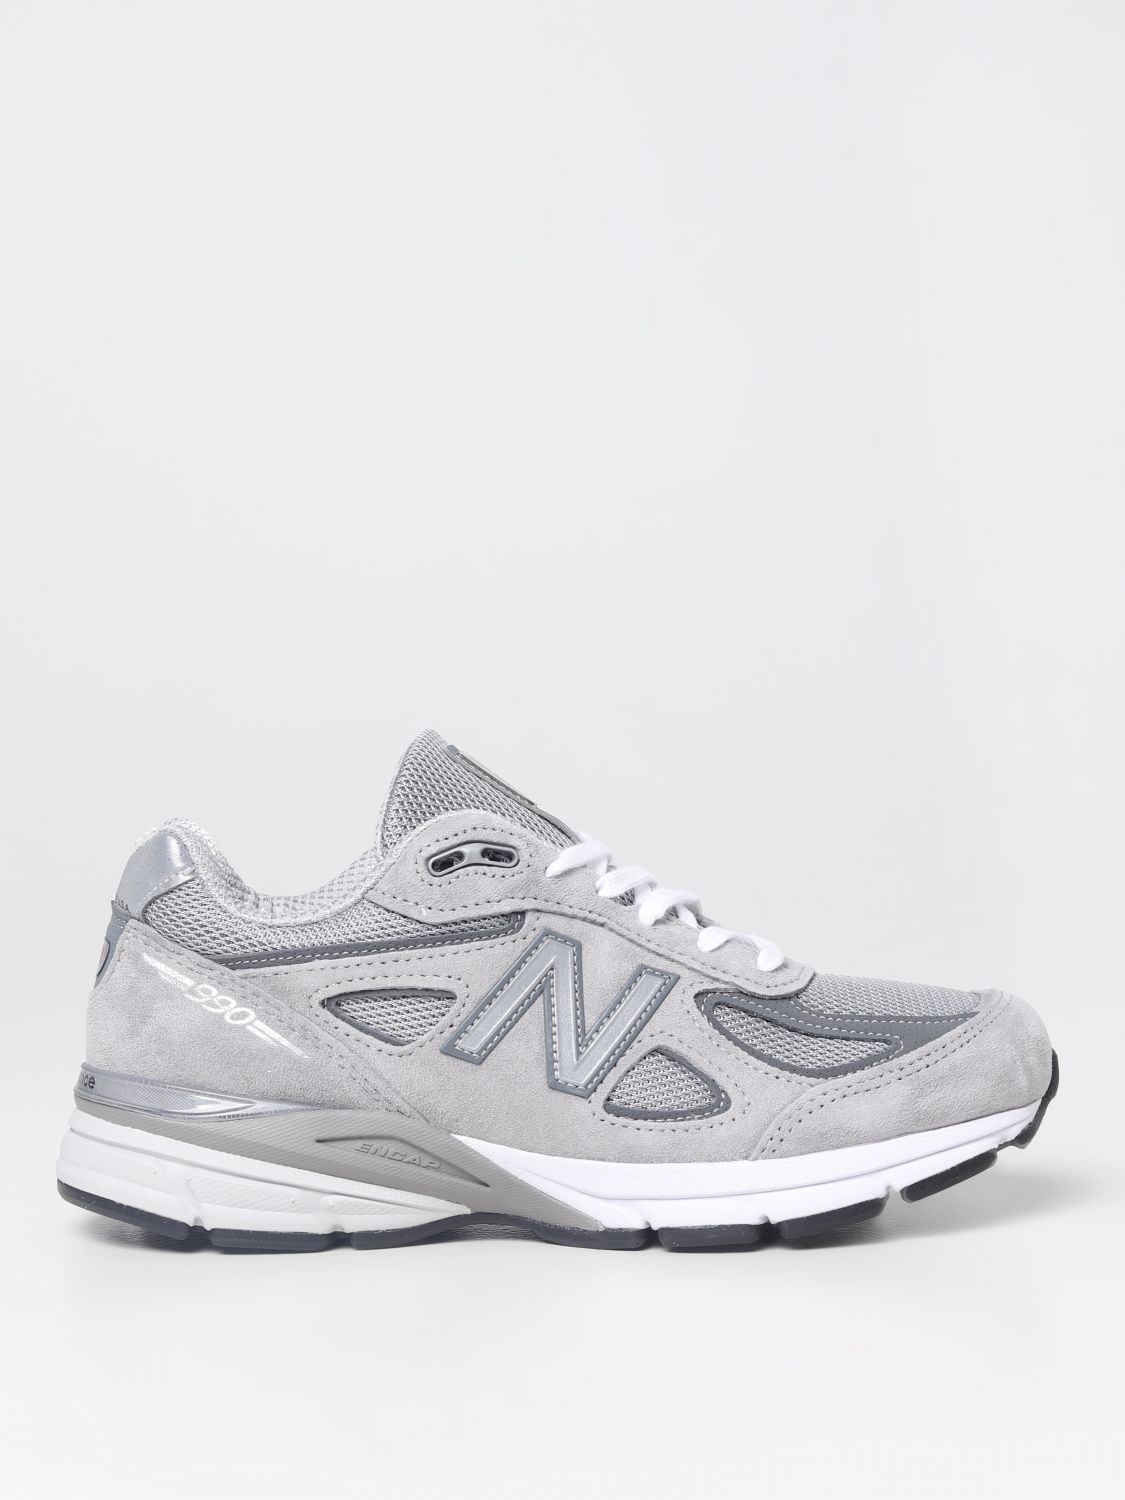 Made in USA 990v6 suede and mesh sneakers - Grey | Balance sneakers U990GR4 online at GIGLIO.COM